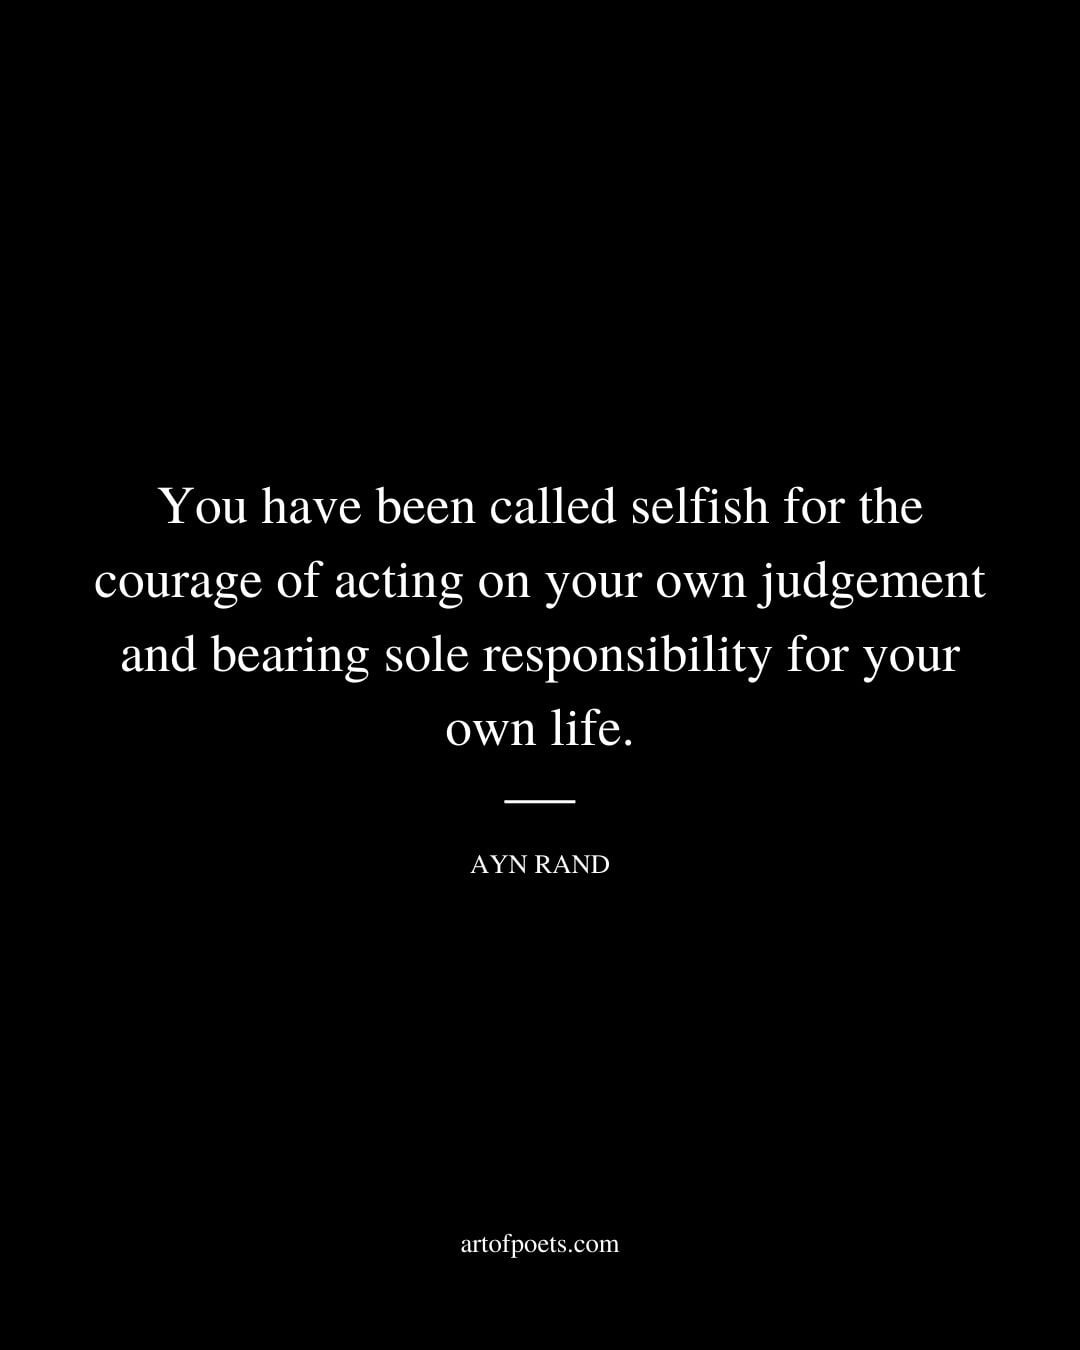 You have been called selfish for the courage of acting on your own judgement and bearing sole responsibility for your own life